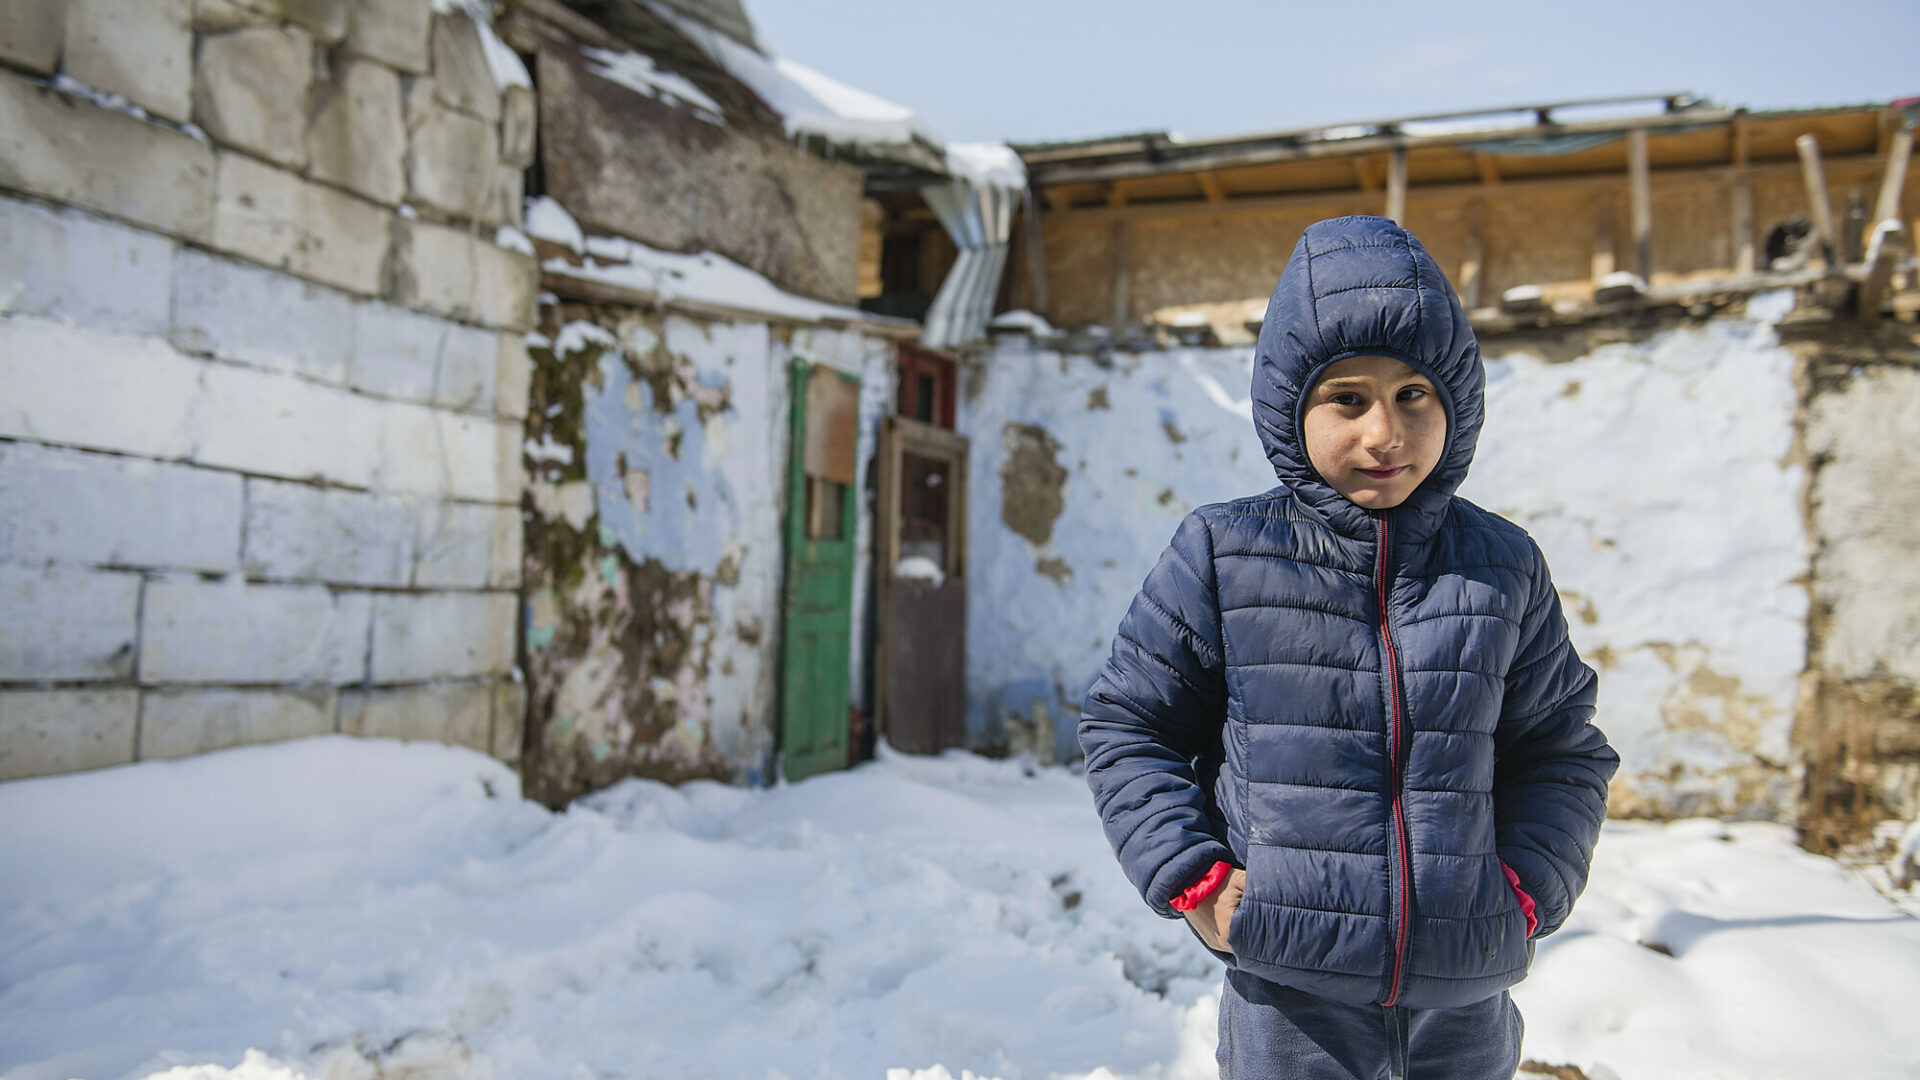 A young romanian boy stands warmly dressed in the snow in front of some farm buildings